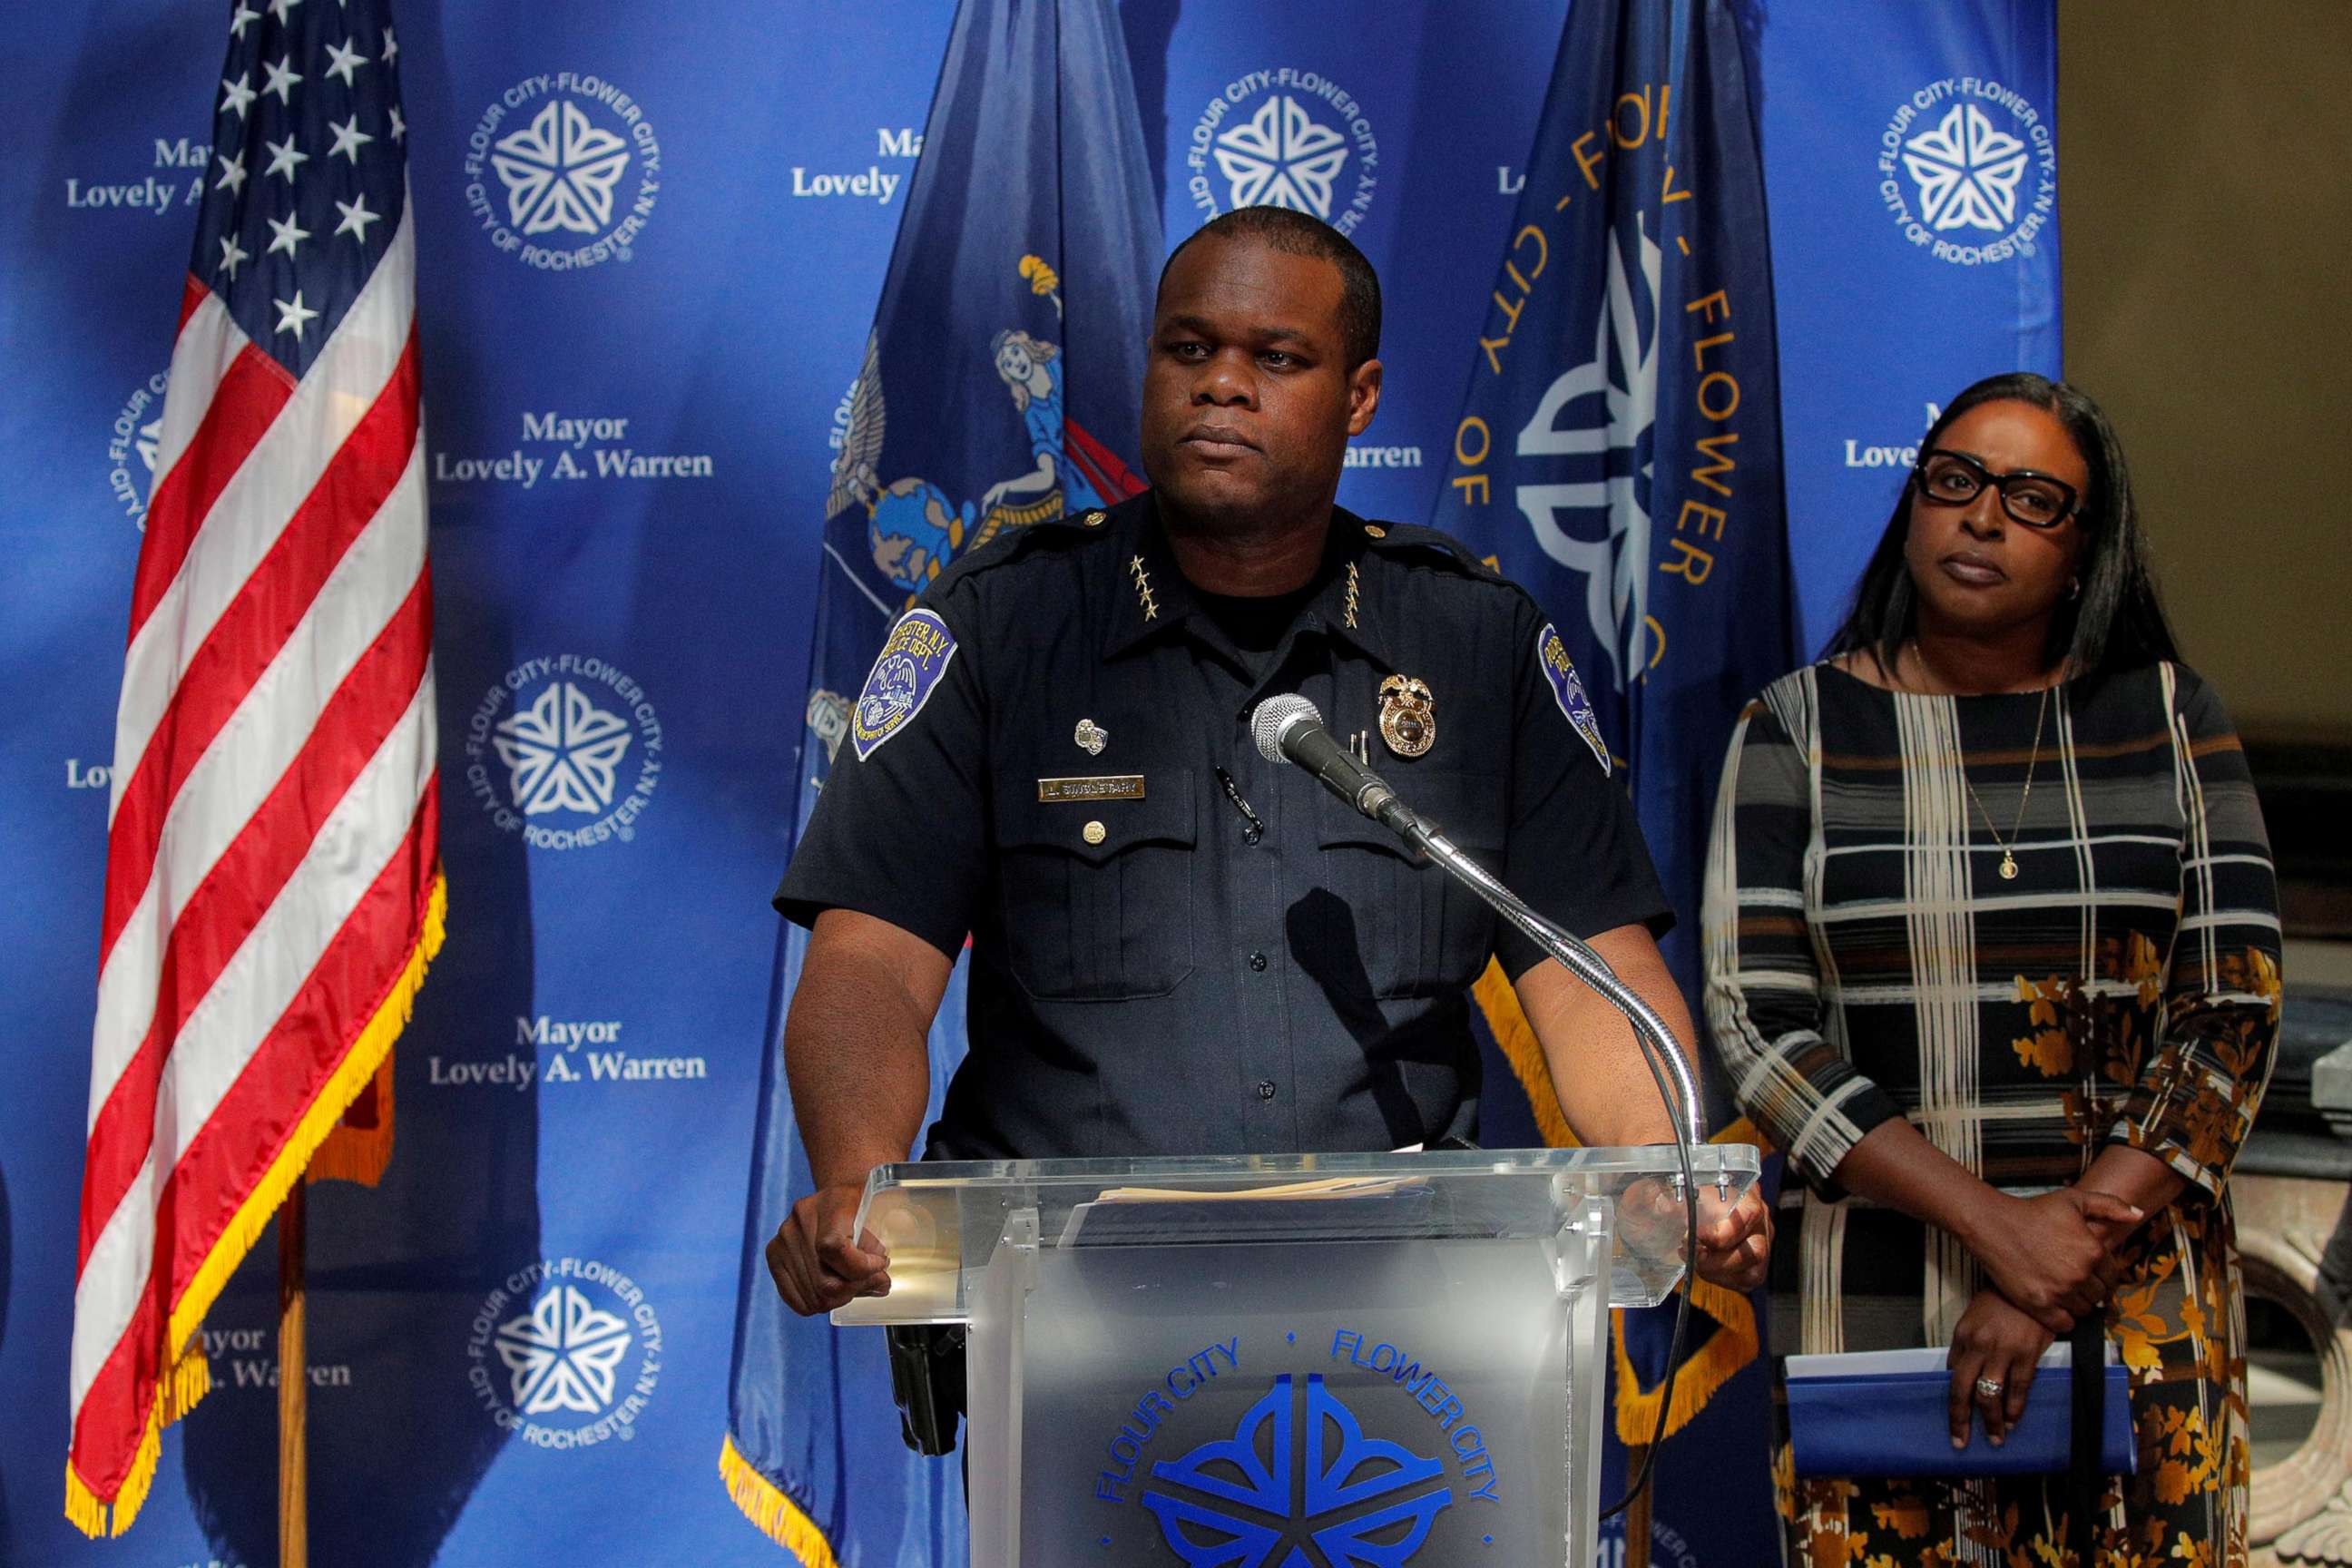 PHOTO: Rochester Police Chief, La'Ron Singletary speaks during a news conference with Mayor Lovely Warren regarding the protests over the death of Daniel Prude during an arrest on March 23, in Rochester, N.Y., Sept. 6, 2020.